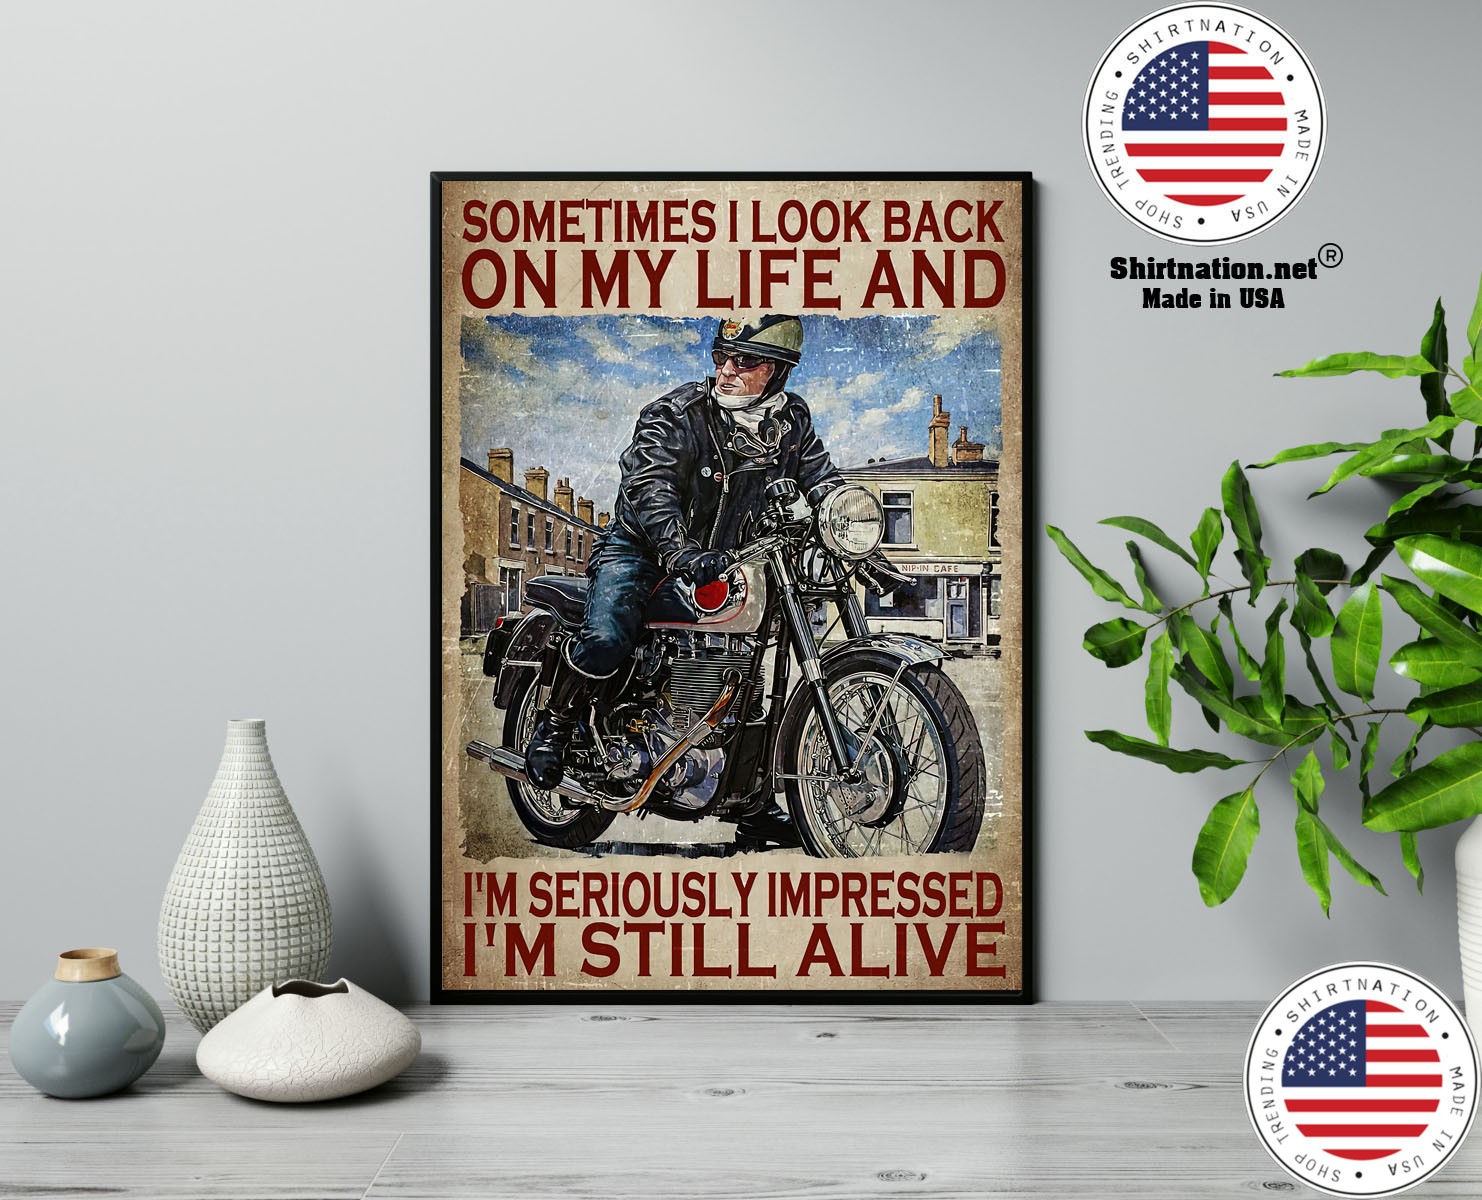 Motorcycles man Sometimes I look back on my life and Im seriously impressed Im still alive poster 13